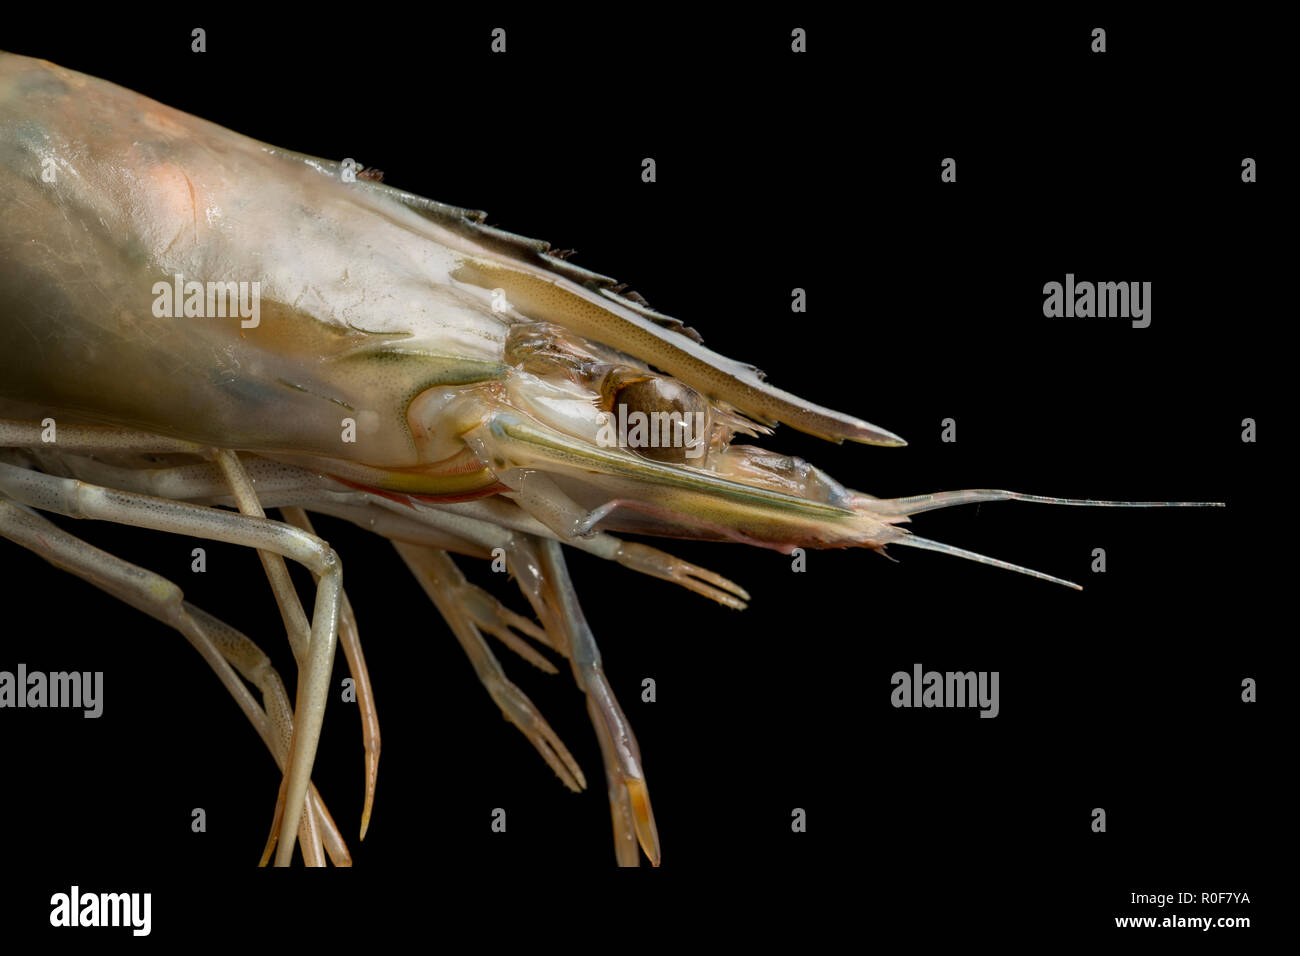 A single farmed raw tiger prawn imported to the UK from Madagascar and bought from a supermarket. Photographed on a black background. England UK GB Stock Photo